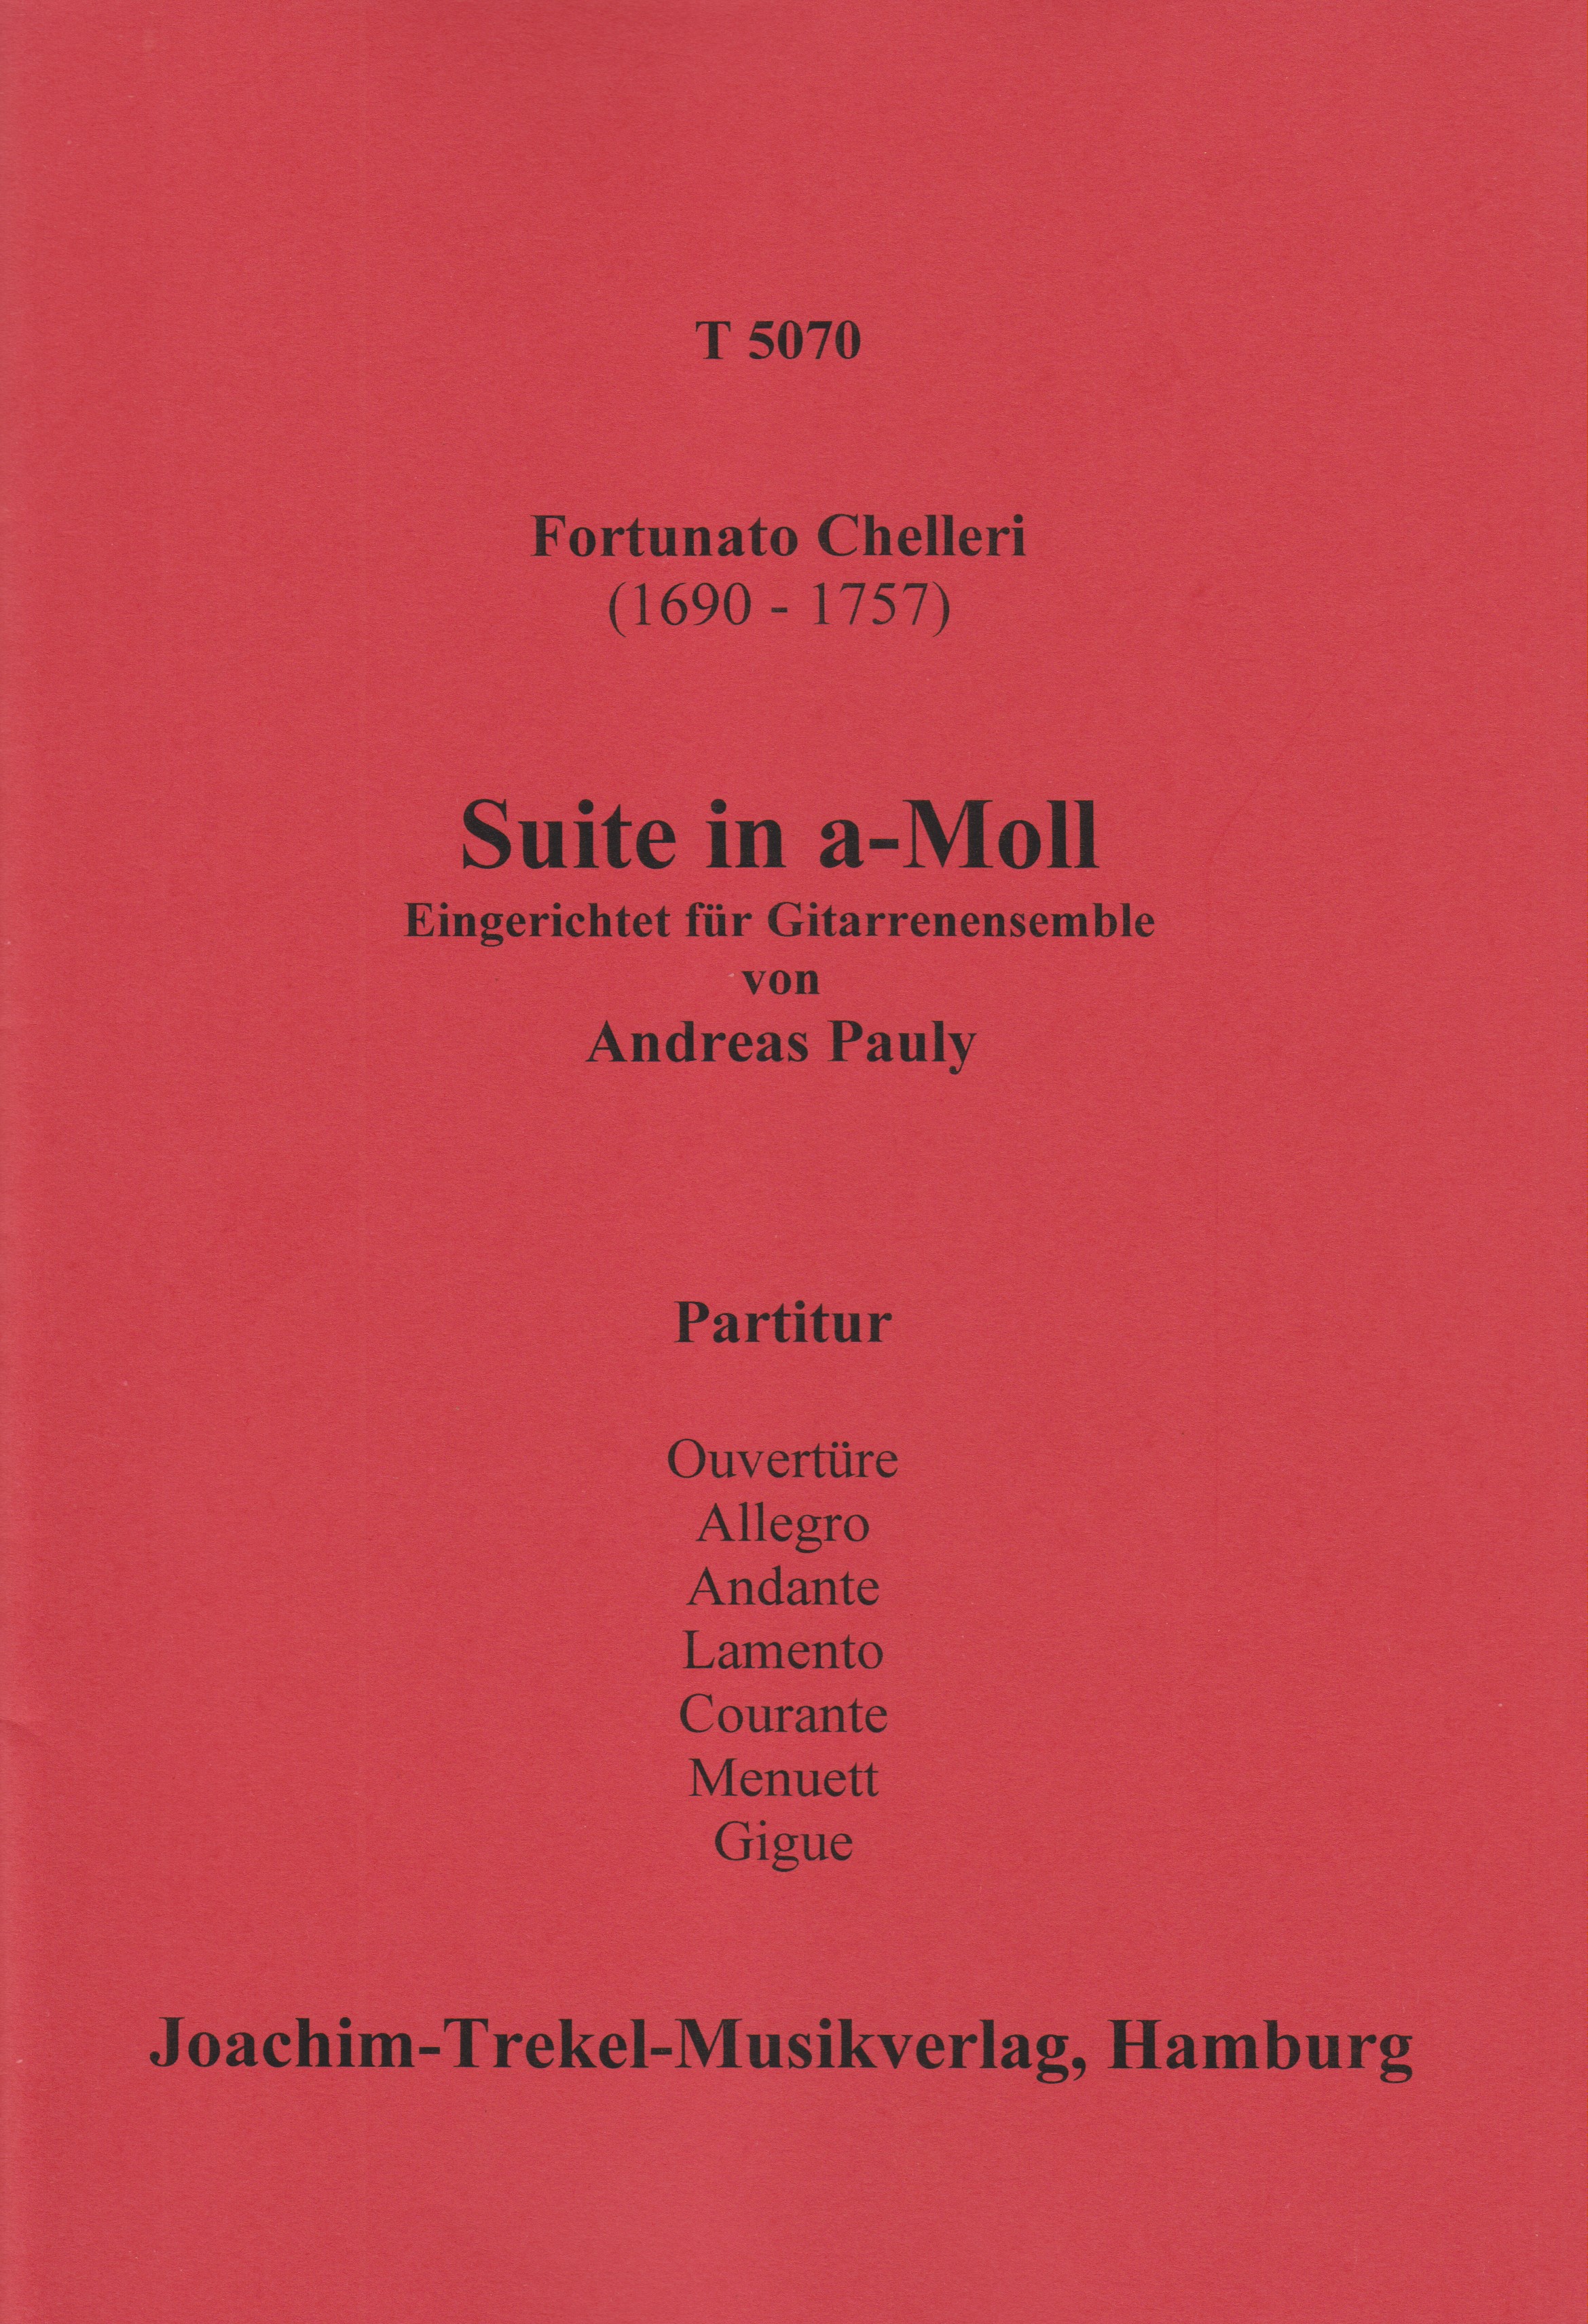 Suite in a-Moll